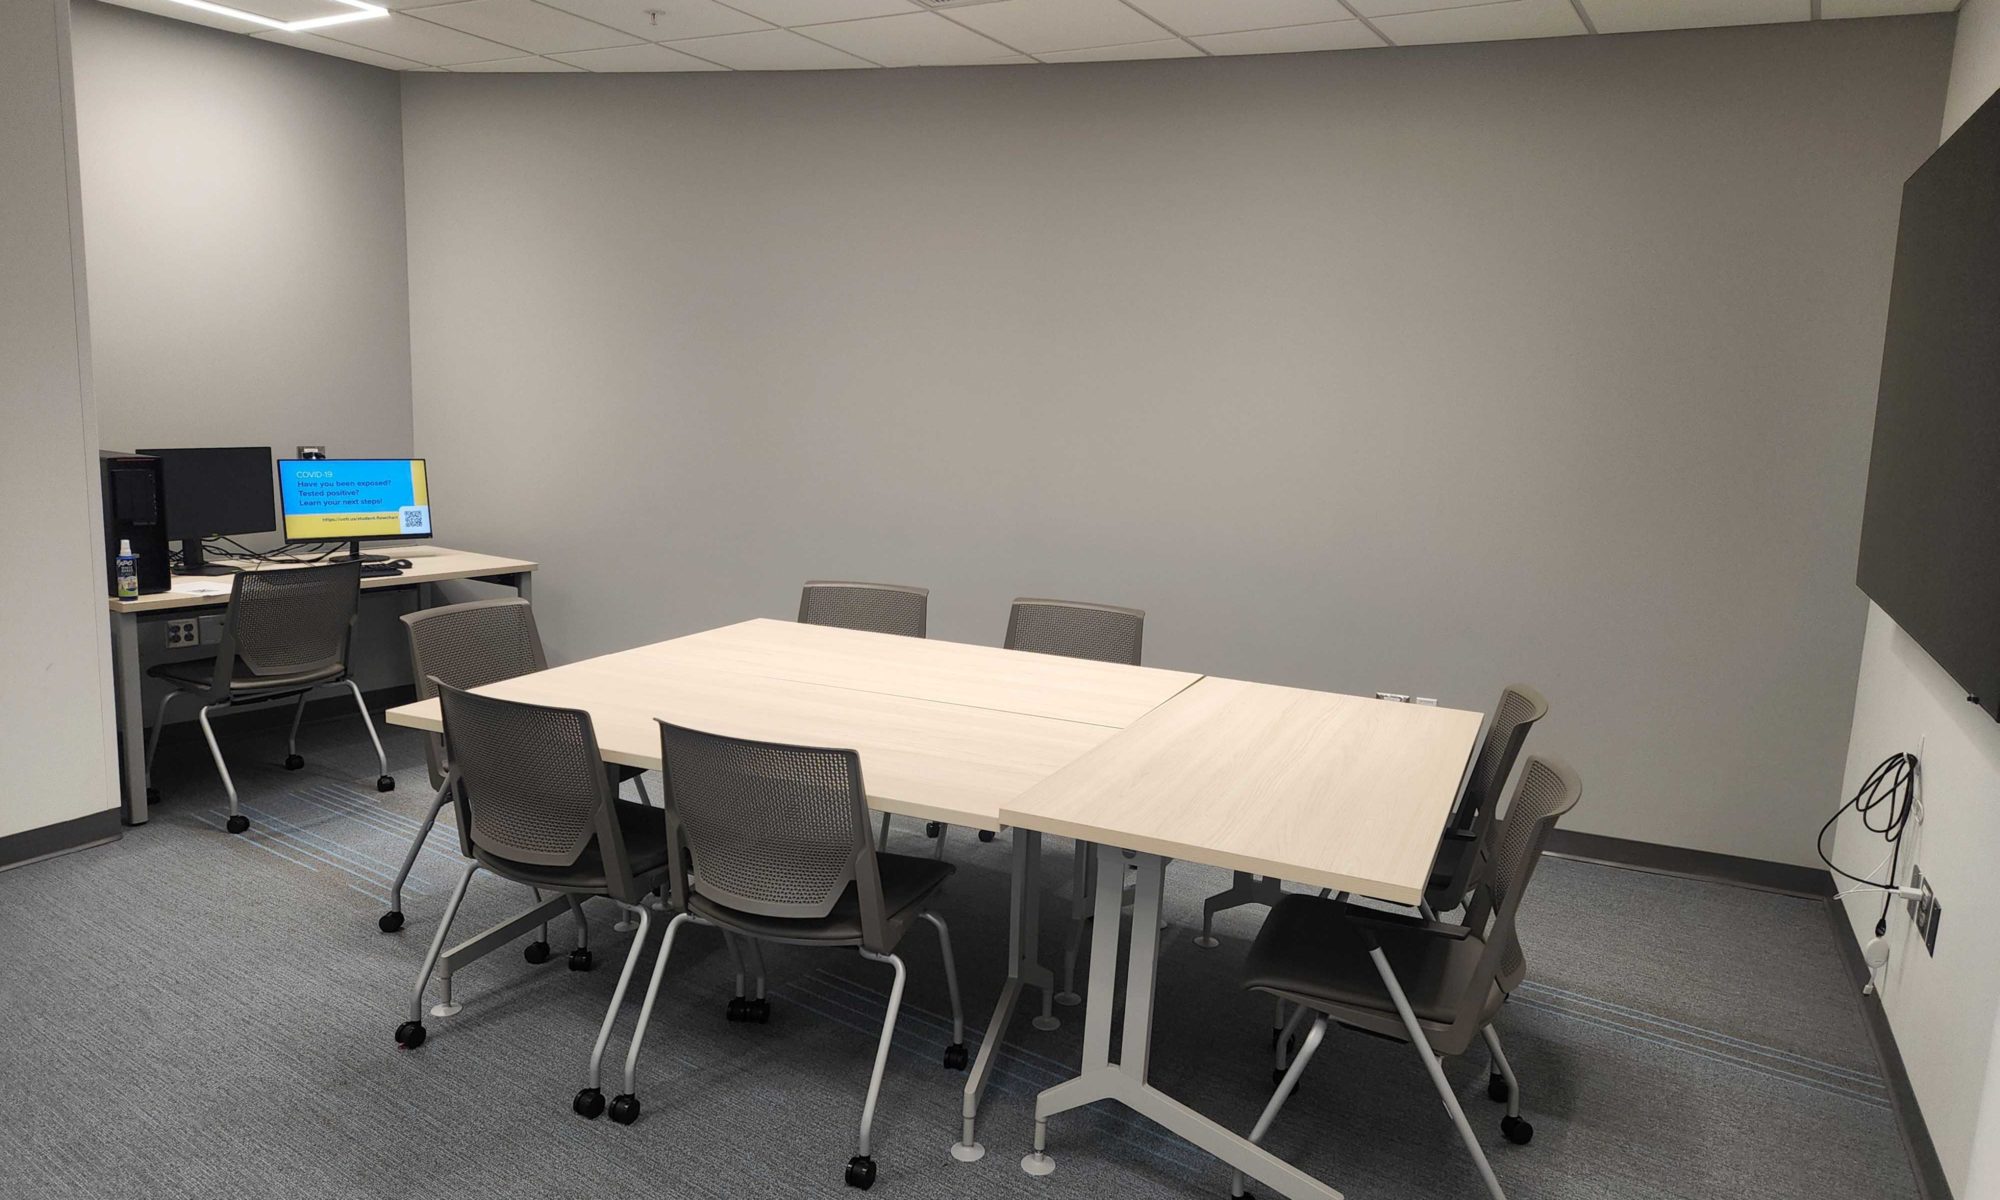 Conference room with Desk, chairs and computer